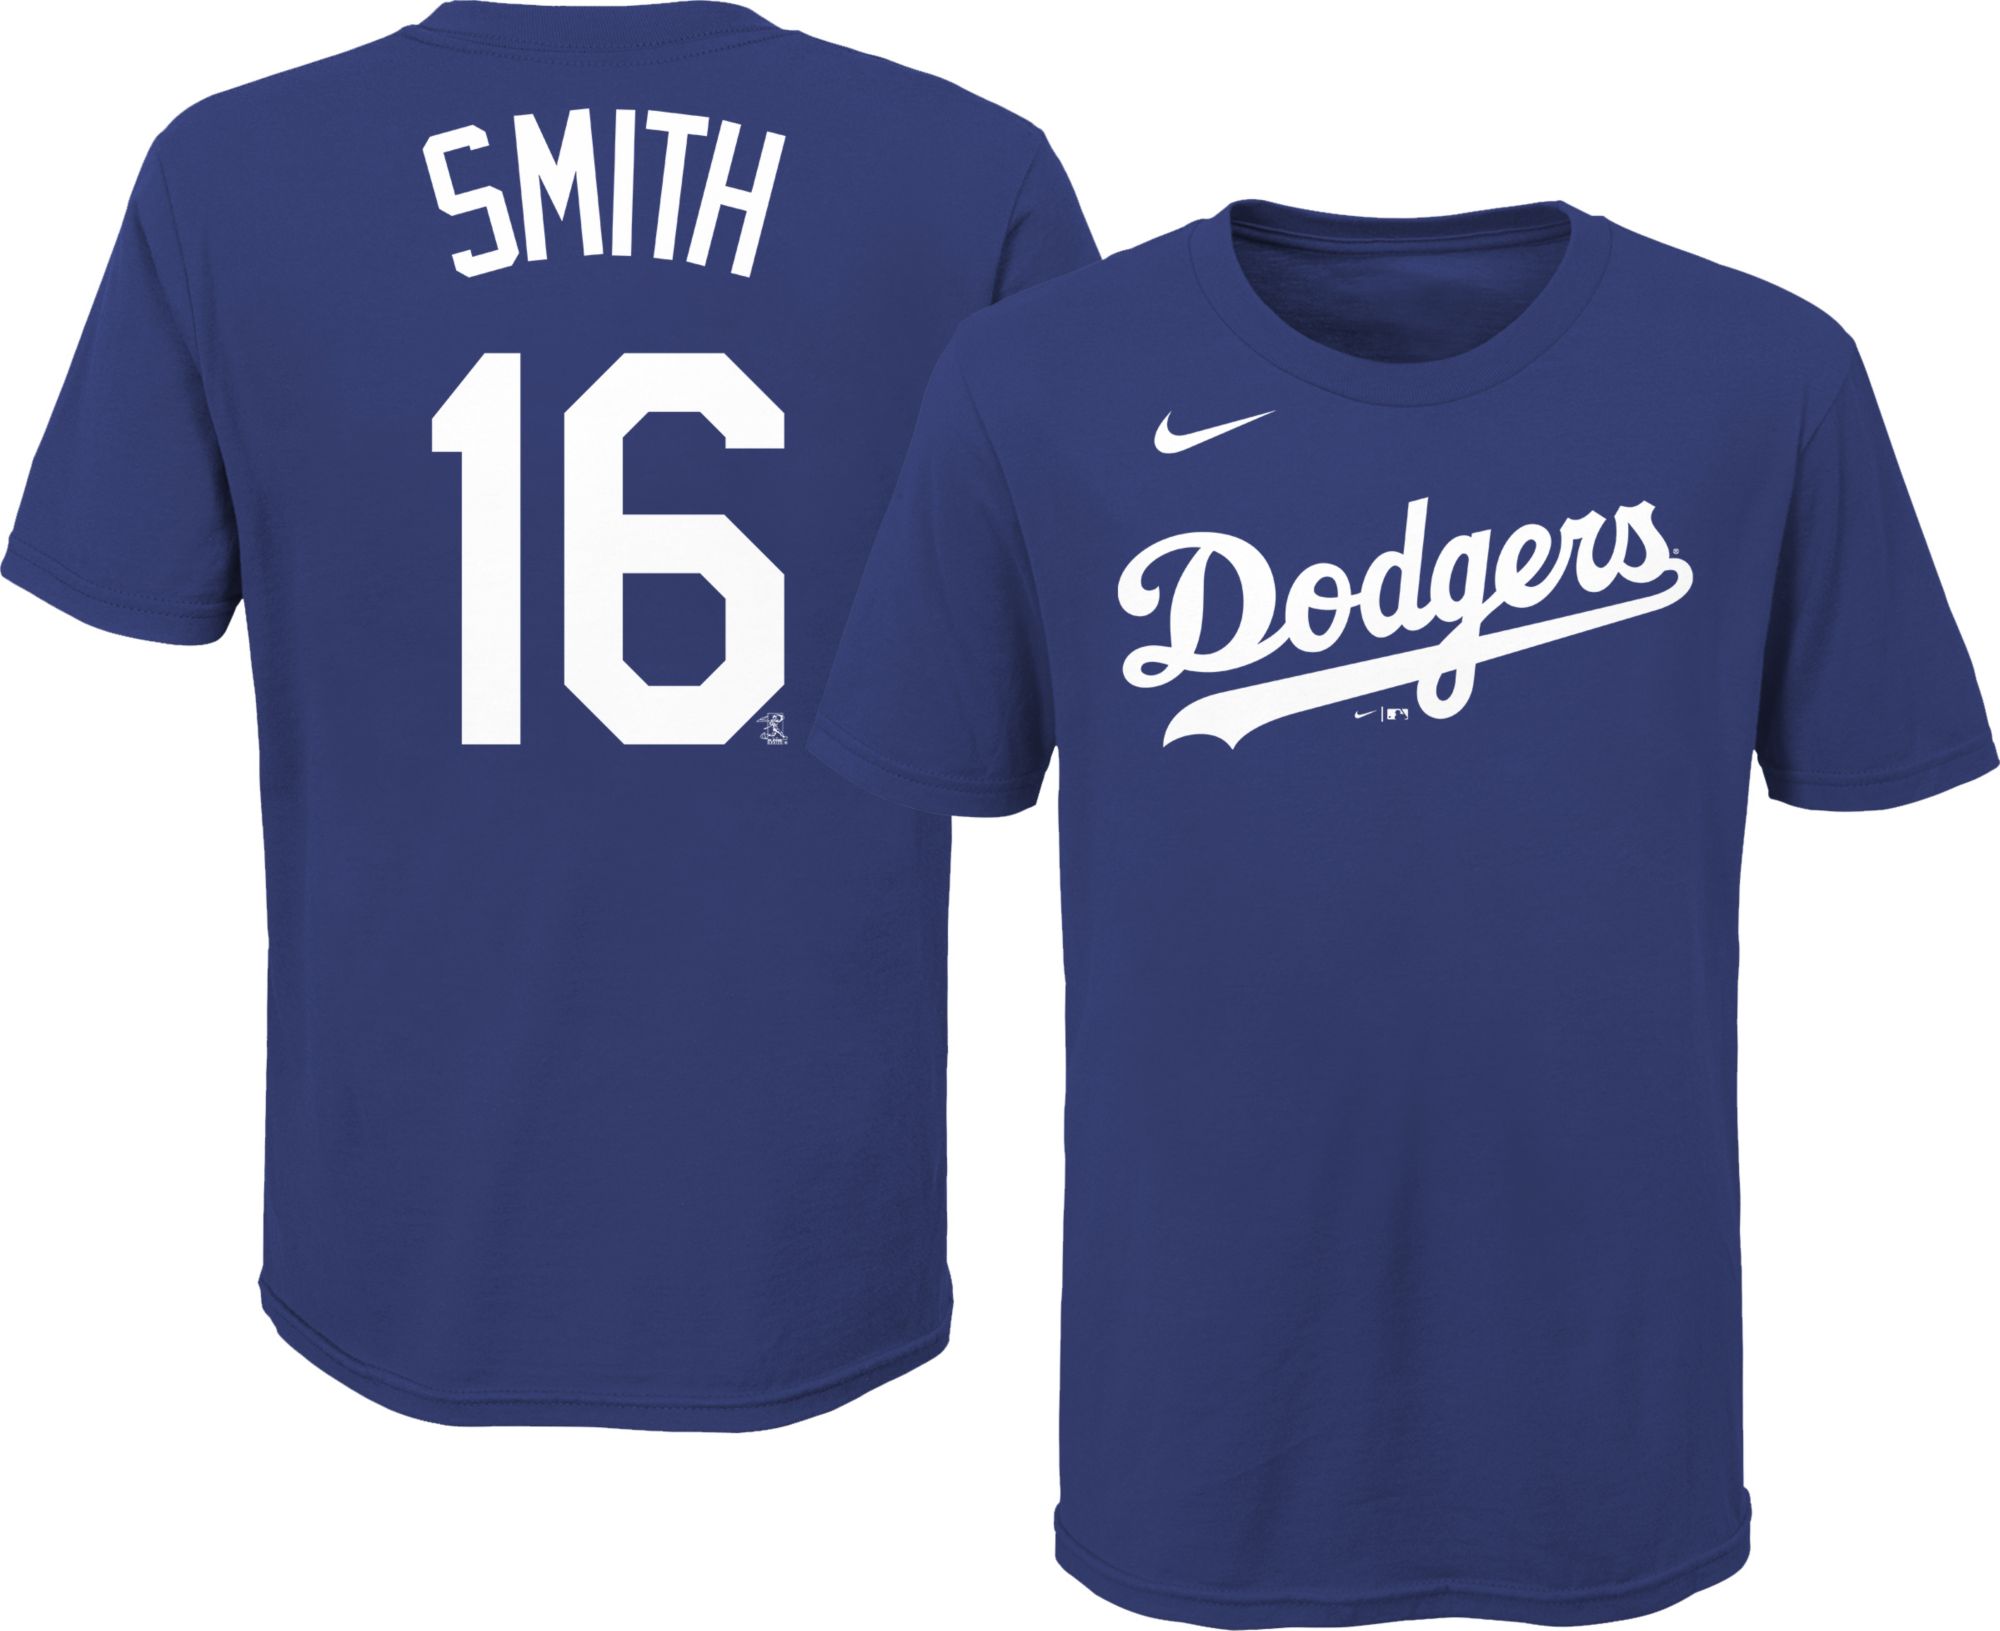 black dodgers jersey youth